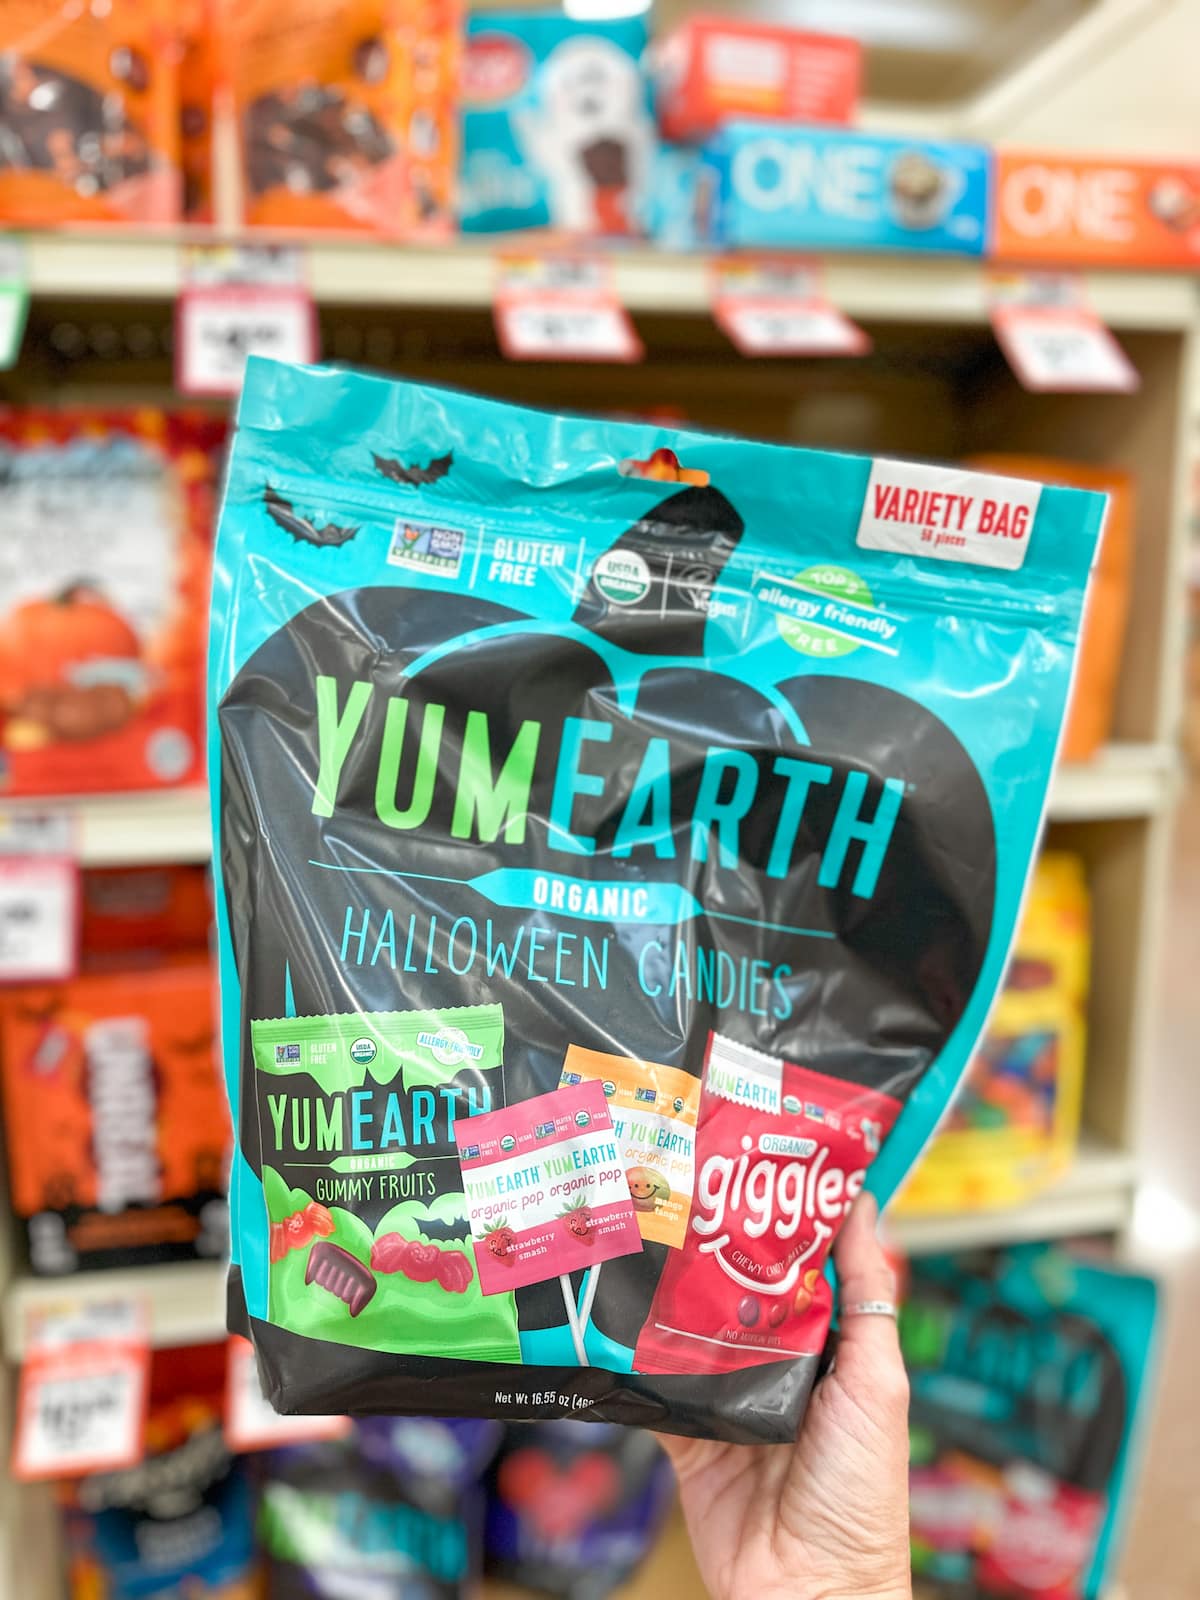 A variety pack of Yum Earth Halloween Candies including gummy fruit, lollipops, and giggles.